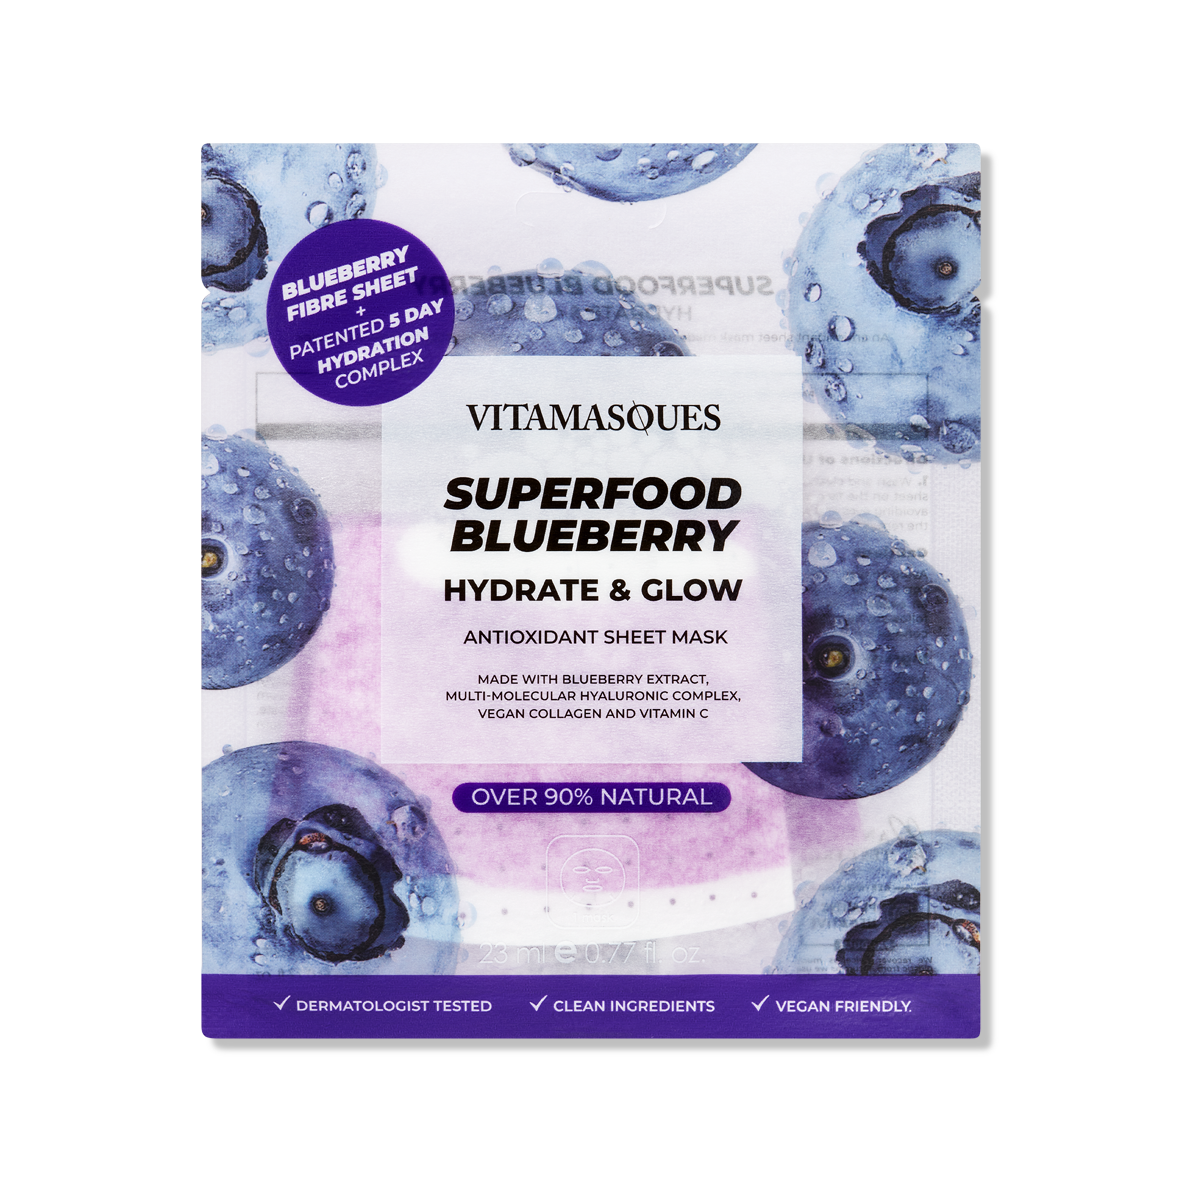 Superfood Blueberry Hydrate & Glow Antioxidant Face Sheet Mask